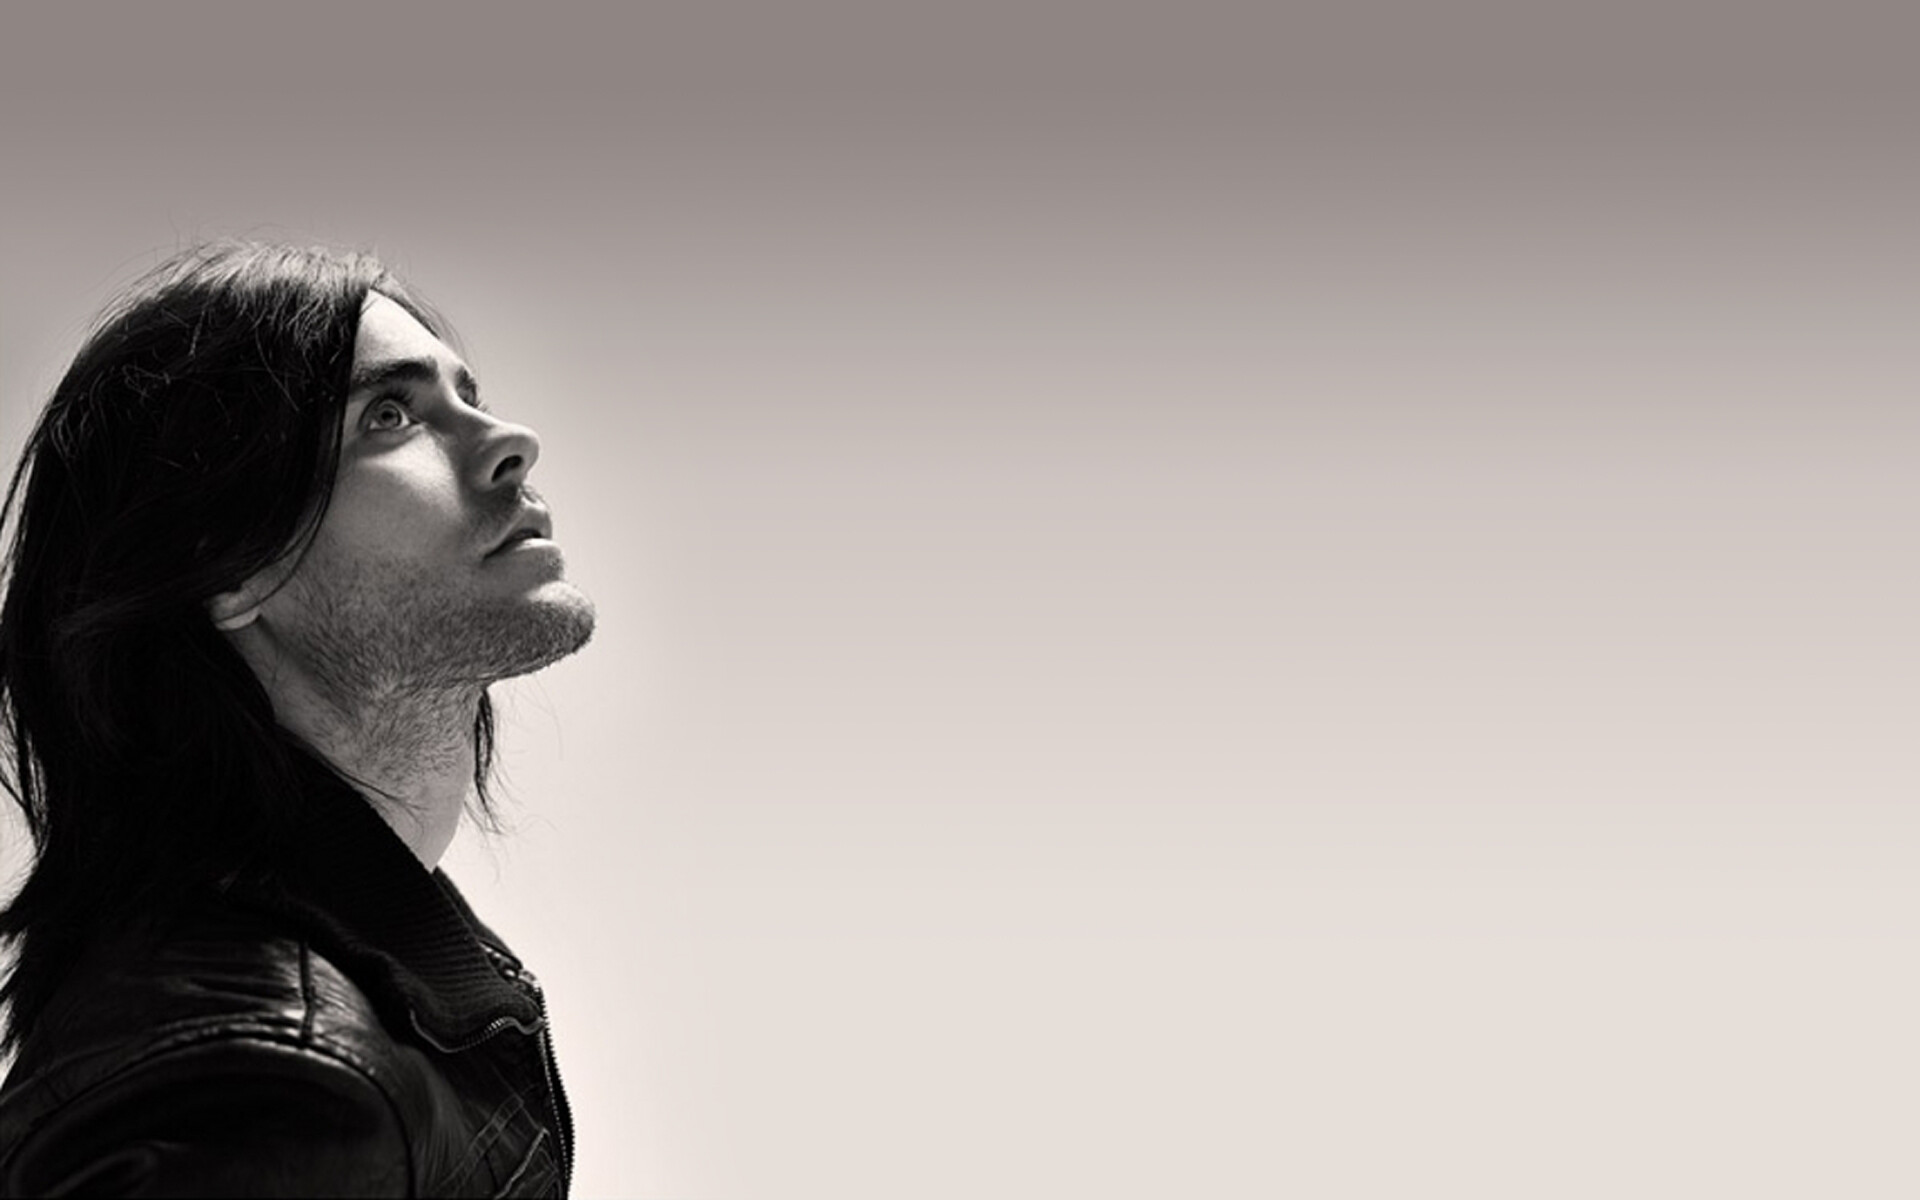 Jared Leto: A Beautiful Lie, Anthemic album that sold over 3.5 million copies. 1920x1200 HD Wallpaper.